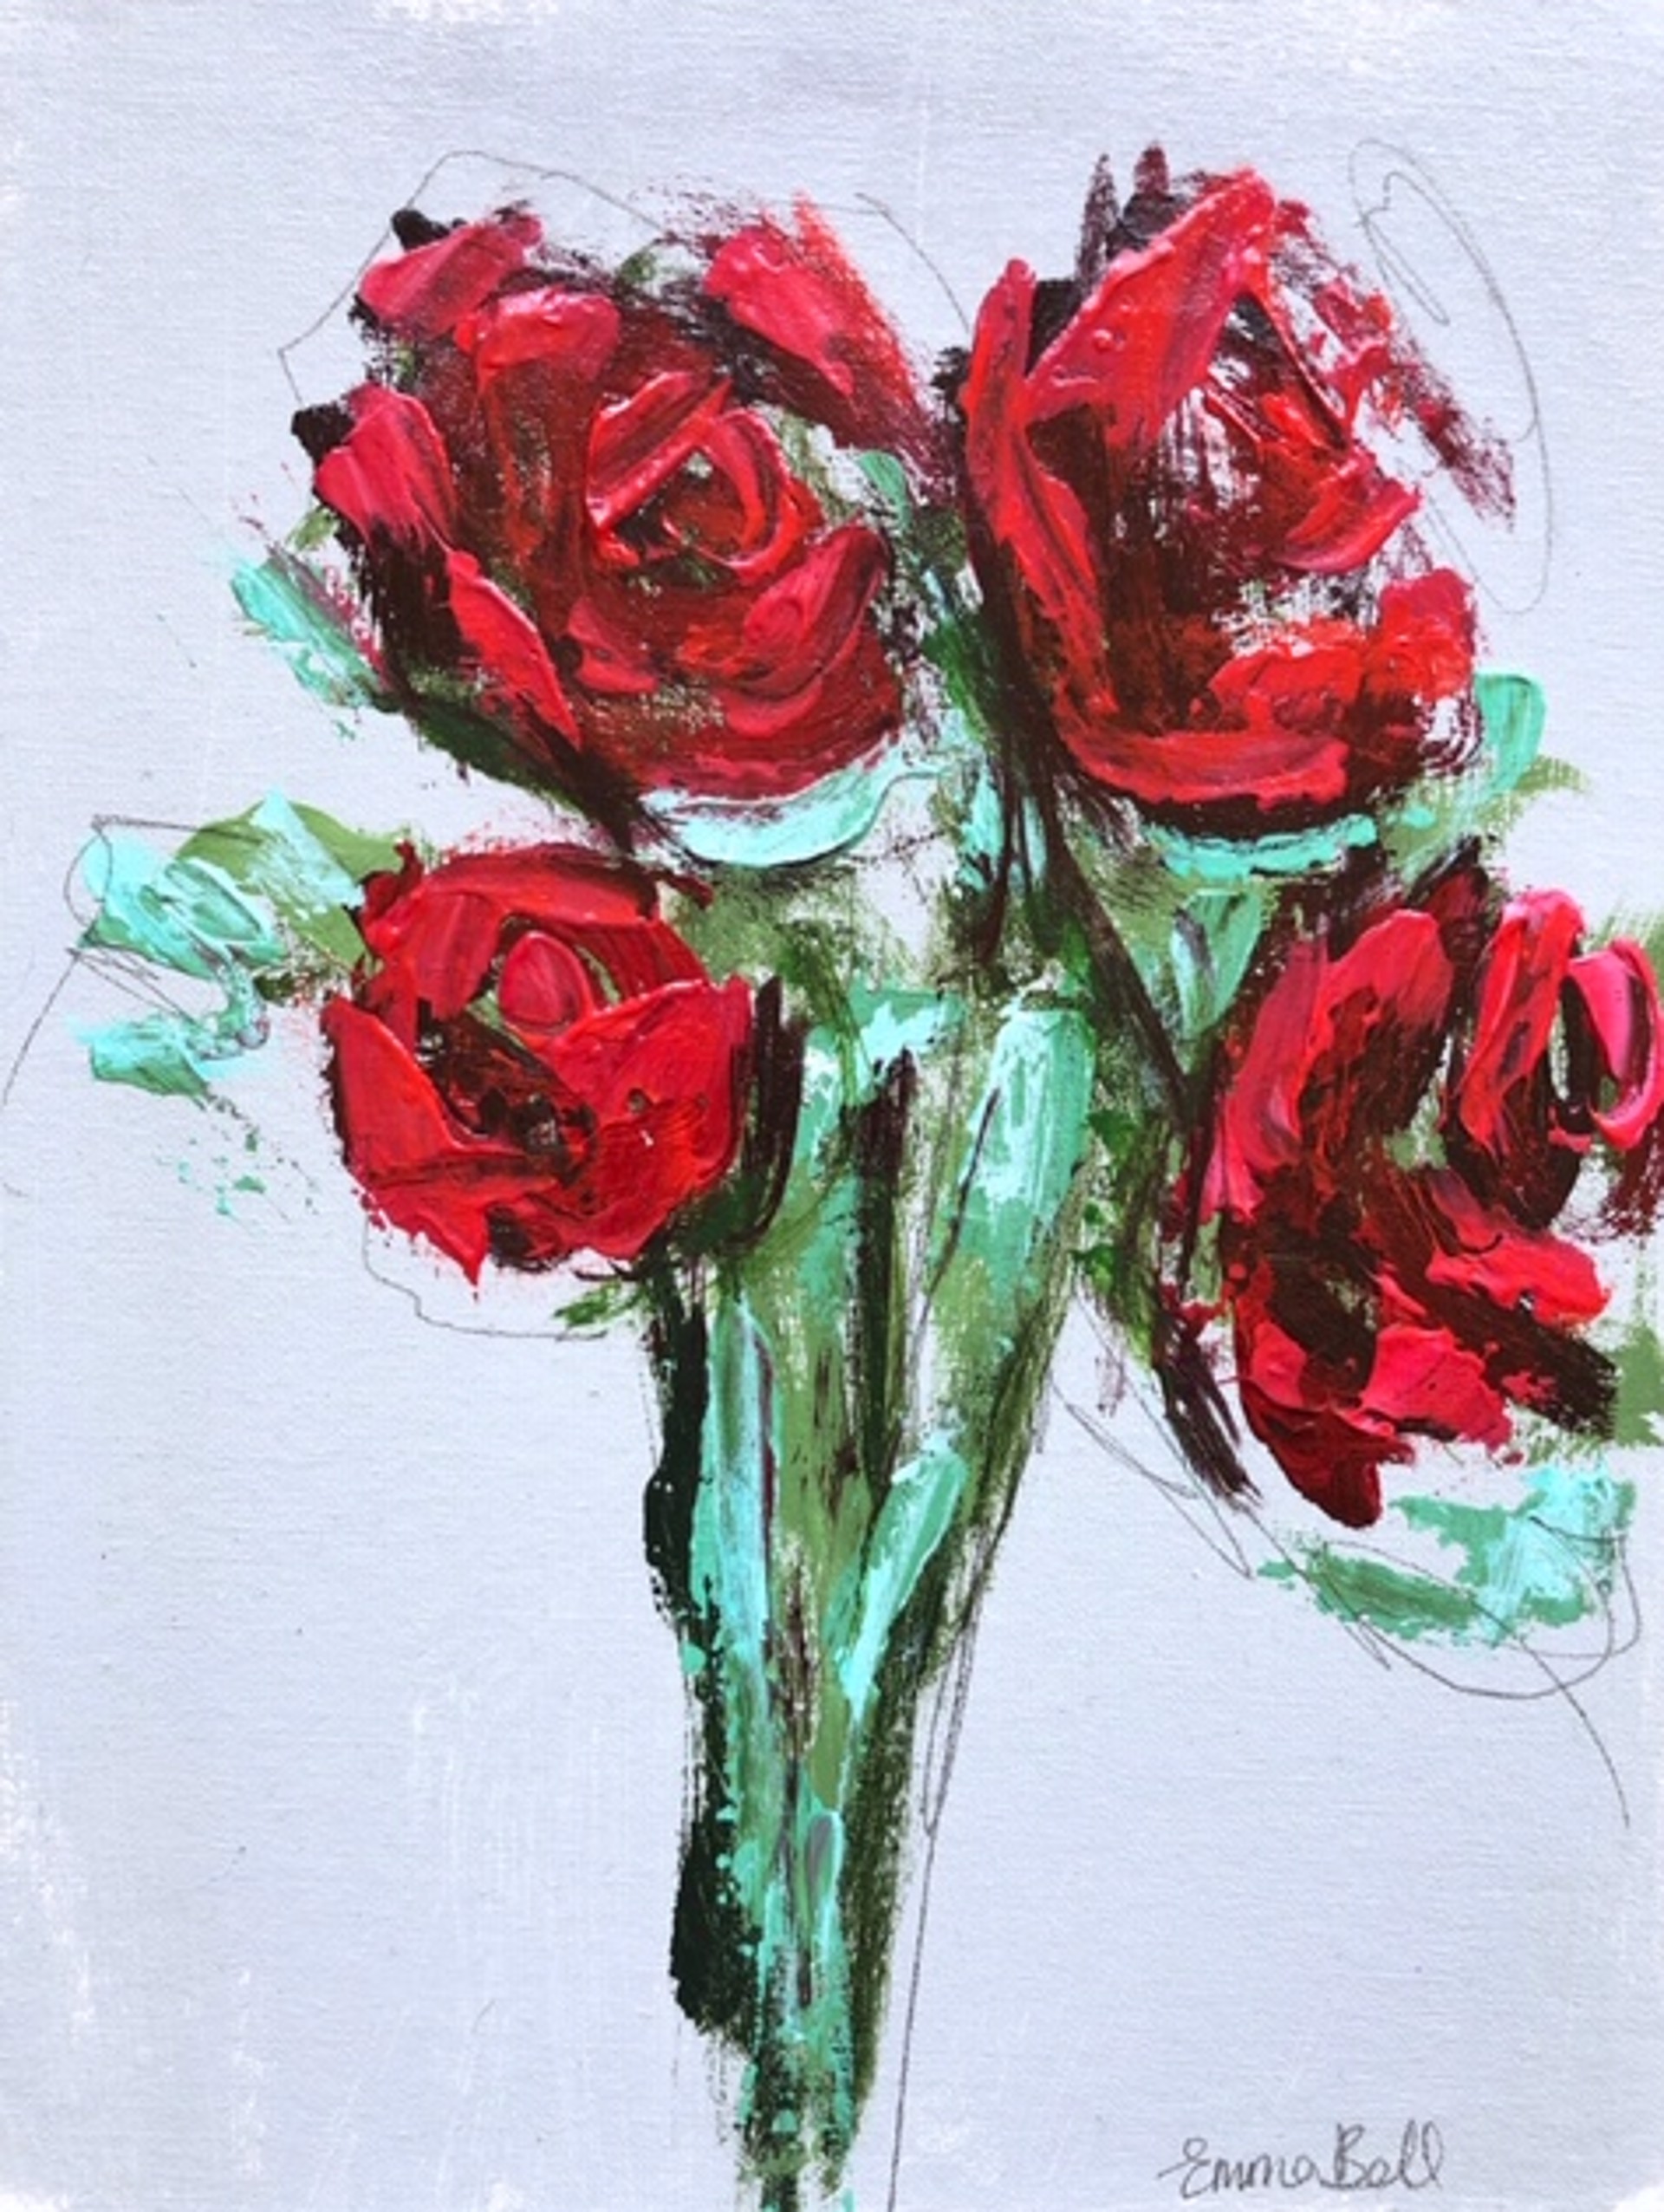 Valentine Roses #8 by Emma Bell